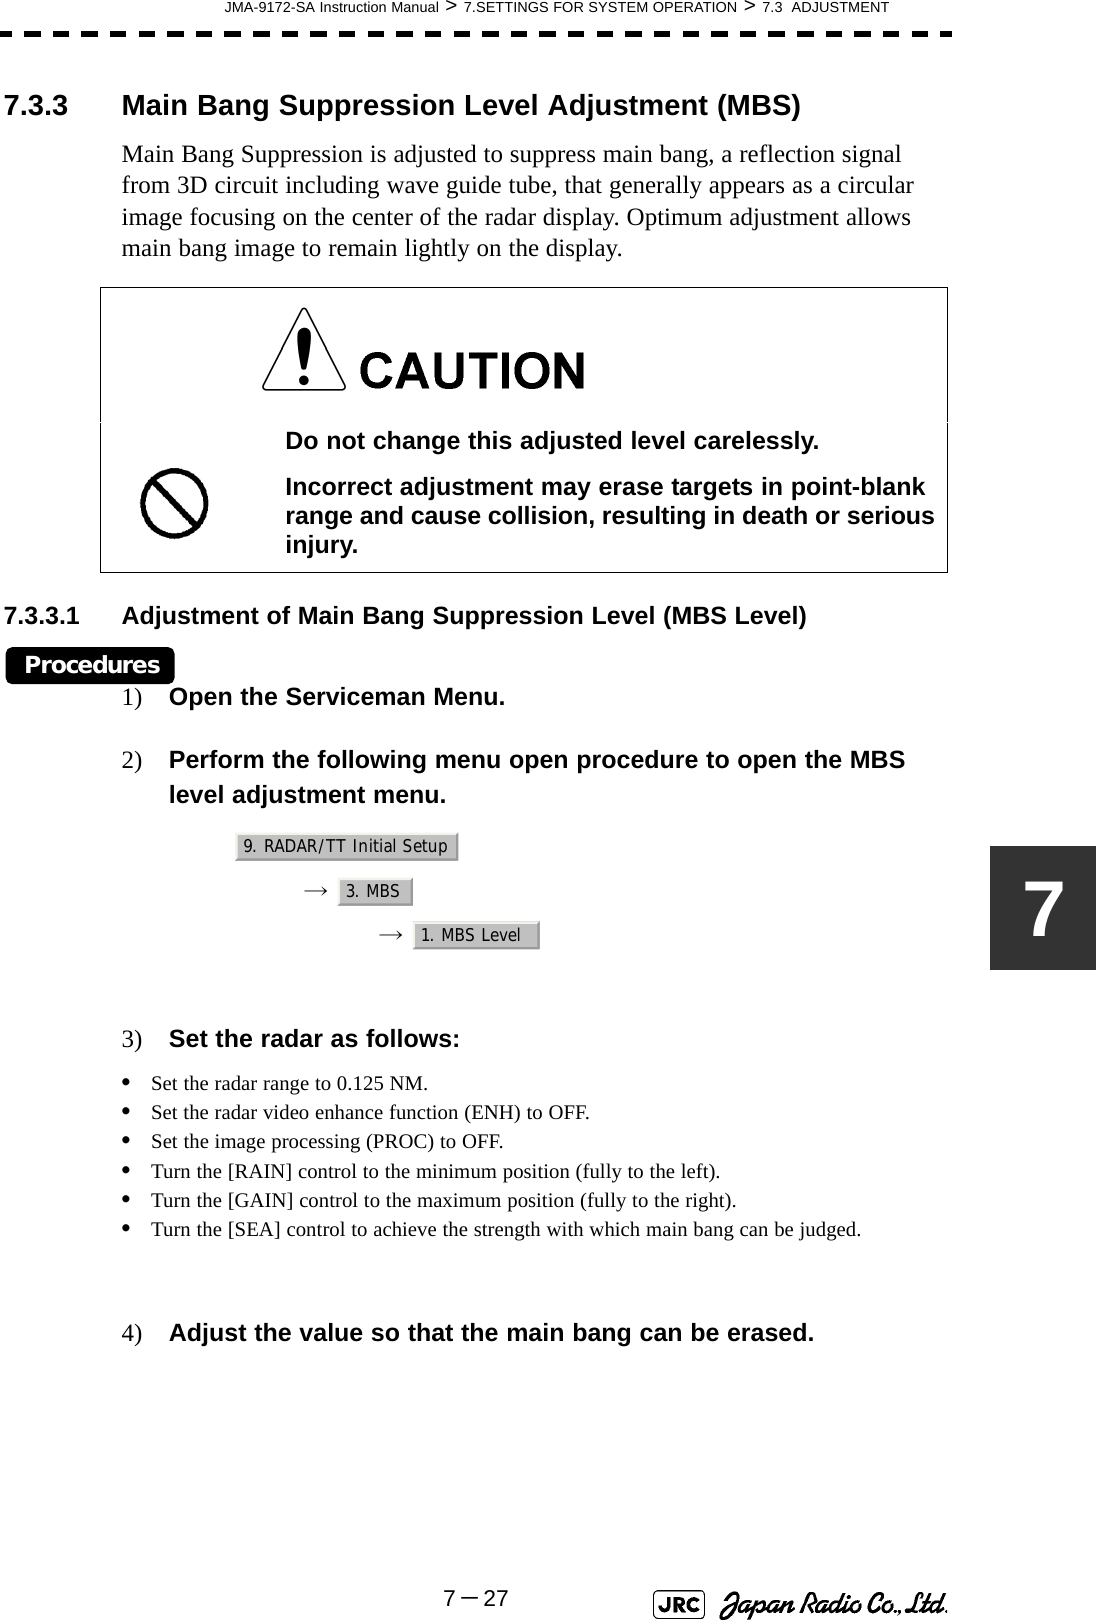 JMA-9172-SA Instruction Manual &gt; 7.SETTINGS FOR SYSTEM OPERATION &gt; 7.3  ADJUSTMENT7－2777.3.3 Main Bang Suppression Level Adjustment (MBS)Main Bang Suppression is adjusted to suppress main bang, a reflection signal from 3D circuit including wave guide tube, that generally appears as a circular image focusing on the center of the radar display. Optimum adjustment allows main bang image to remain lightly on the display.7.3.3.1 Adjustment of Main Bang Suppression Level (MBS Level)Procedures1) Open the Serviceman Menu.2) Perform the following menu open procedure to open the MBS level adjustment menu.→  →  3) Set the radar as follows:•Set the radar range to 0.125 NM.•Set the radar video enhance function (ENH) to OFF.•Set the image processing (PROC) to OFF.•Turn the [RAIN] control to the minimum position (fully to the left).•Turn the [GAIN] control to the maximum position (fully to the right).•Turn the [SEA] control to achieve the strength with which main bang can be judged.4) Adjust the value so that the main bang can be erased. Do not change this adjusted level carelessly.Incorrect adjustment may erase targets in point-blank range and cause collision, resulting in death or serious injury.9. RADAR/TT Initial Setup3. MBS1. MBS Level